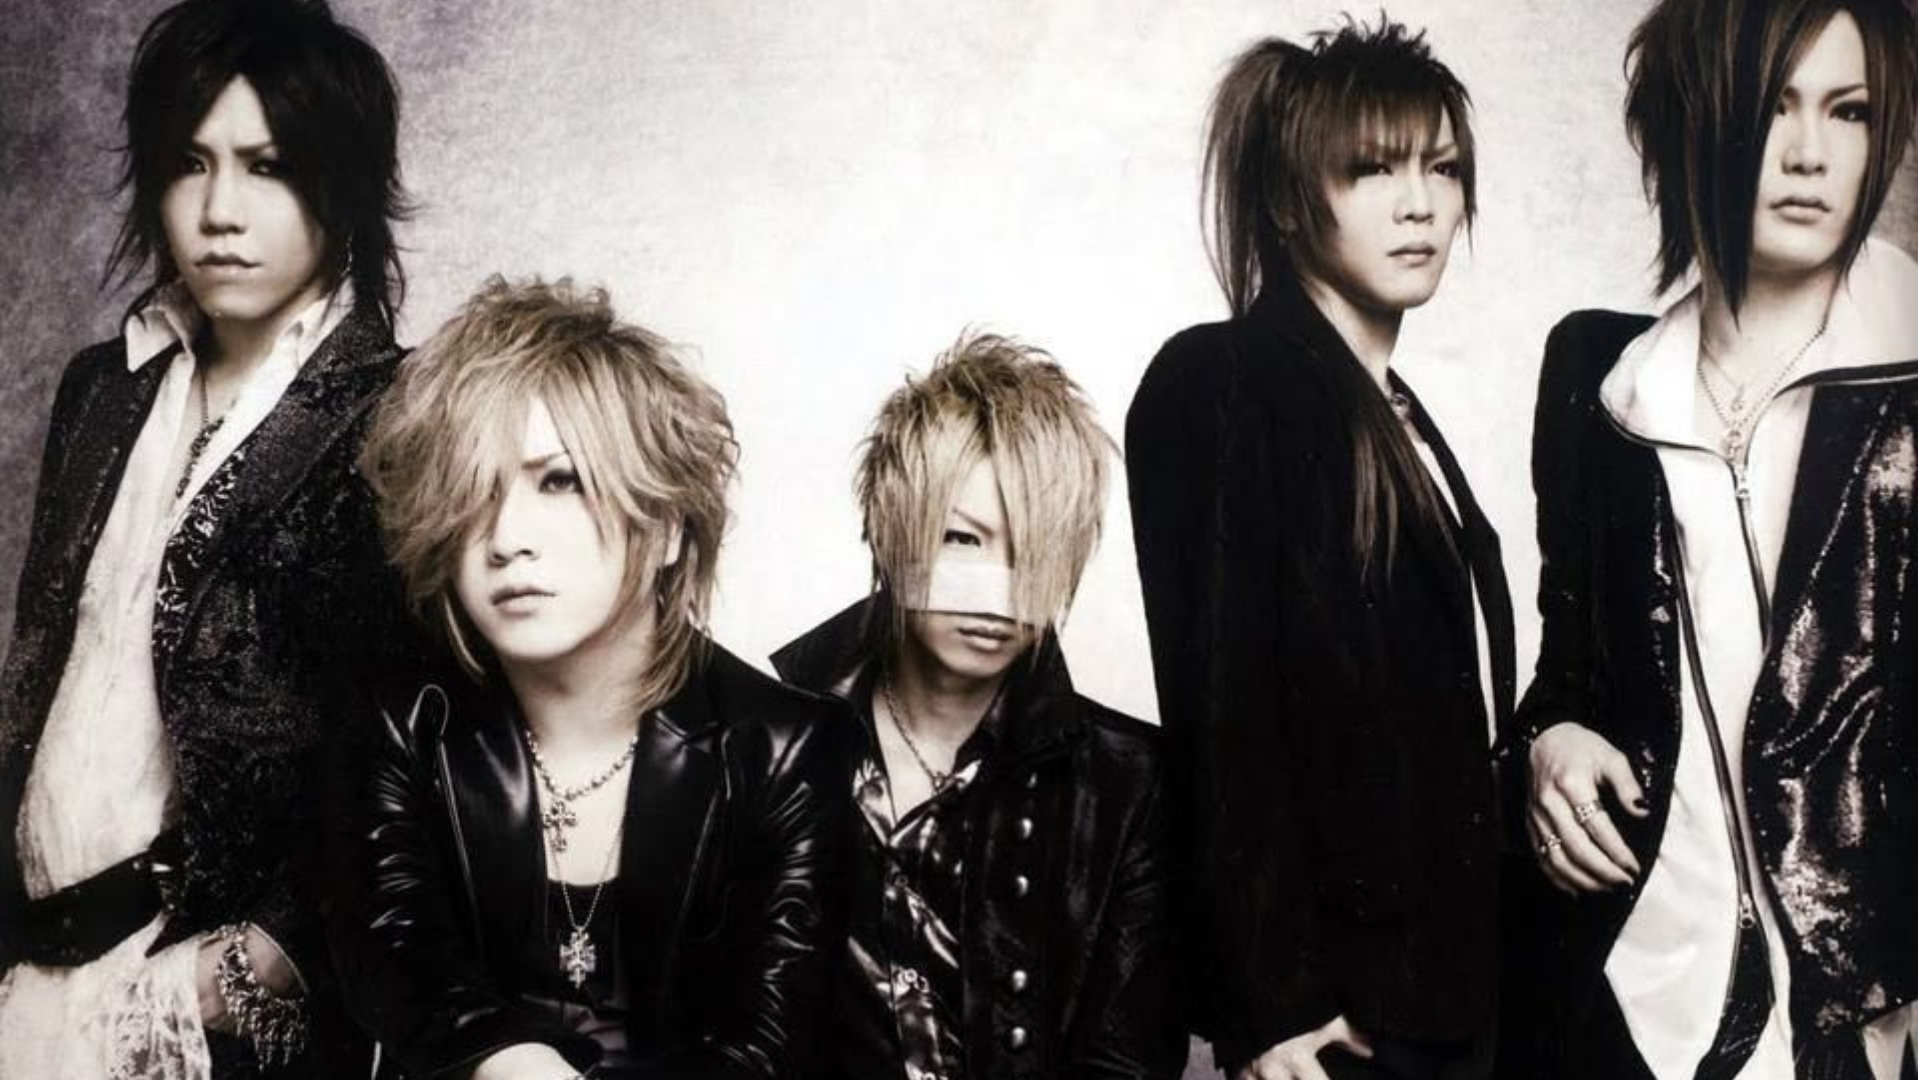 <p>The Gazette became a fully formed band when they recruited members Aoi and Yune in 2002, and later released their first single, ‘Wakaremichi’ in the same year, in April.</p> <p>Image: PS Company</p>